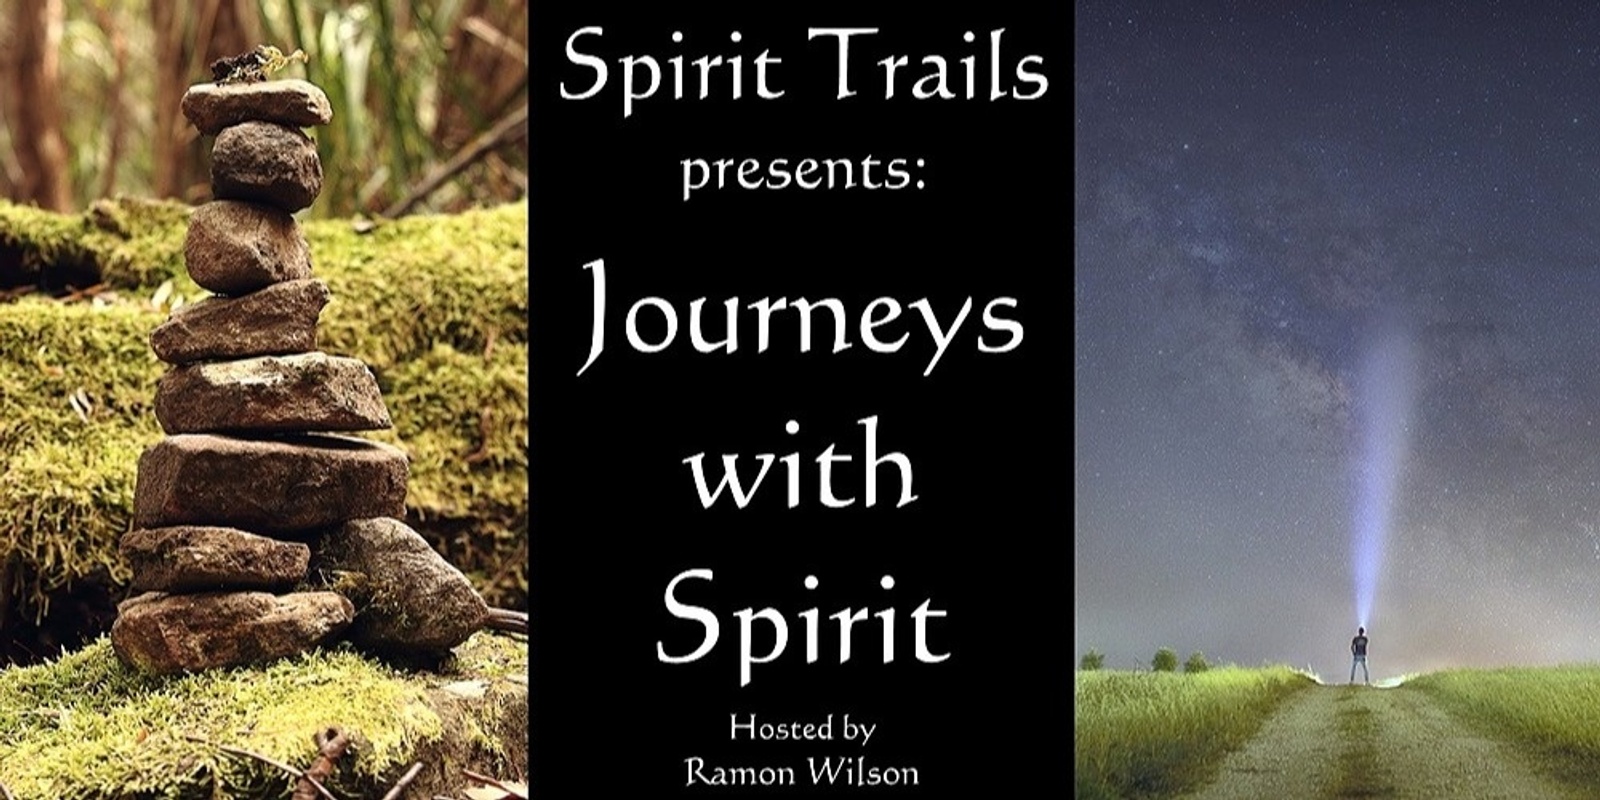 Banner image for Journeys with Spirit: How to Meditate in a Busy World (CANCELLED)